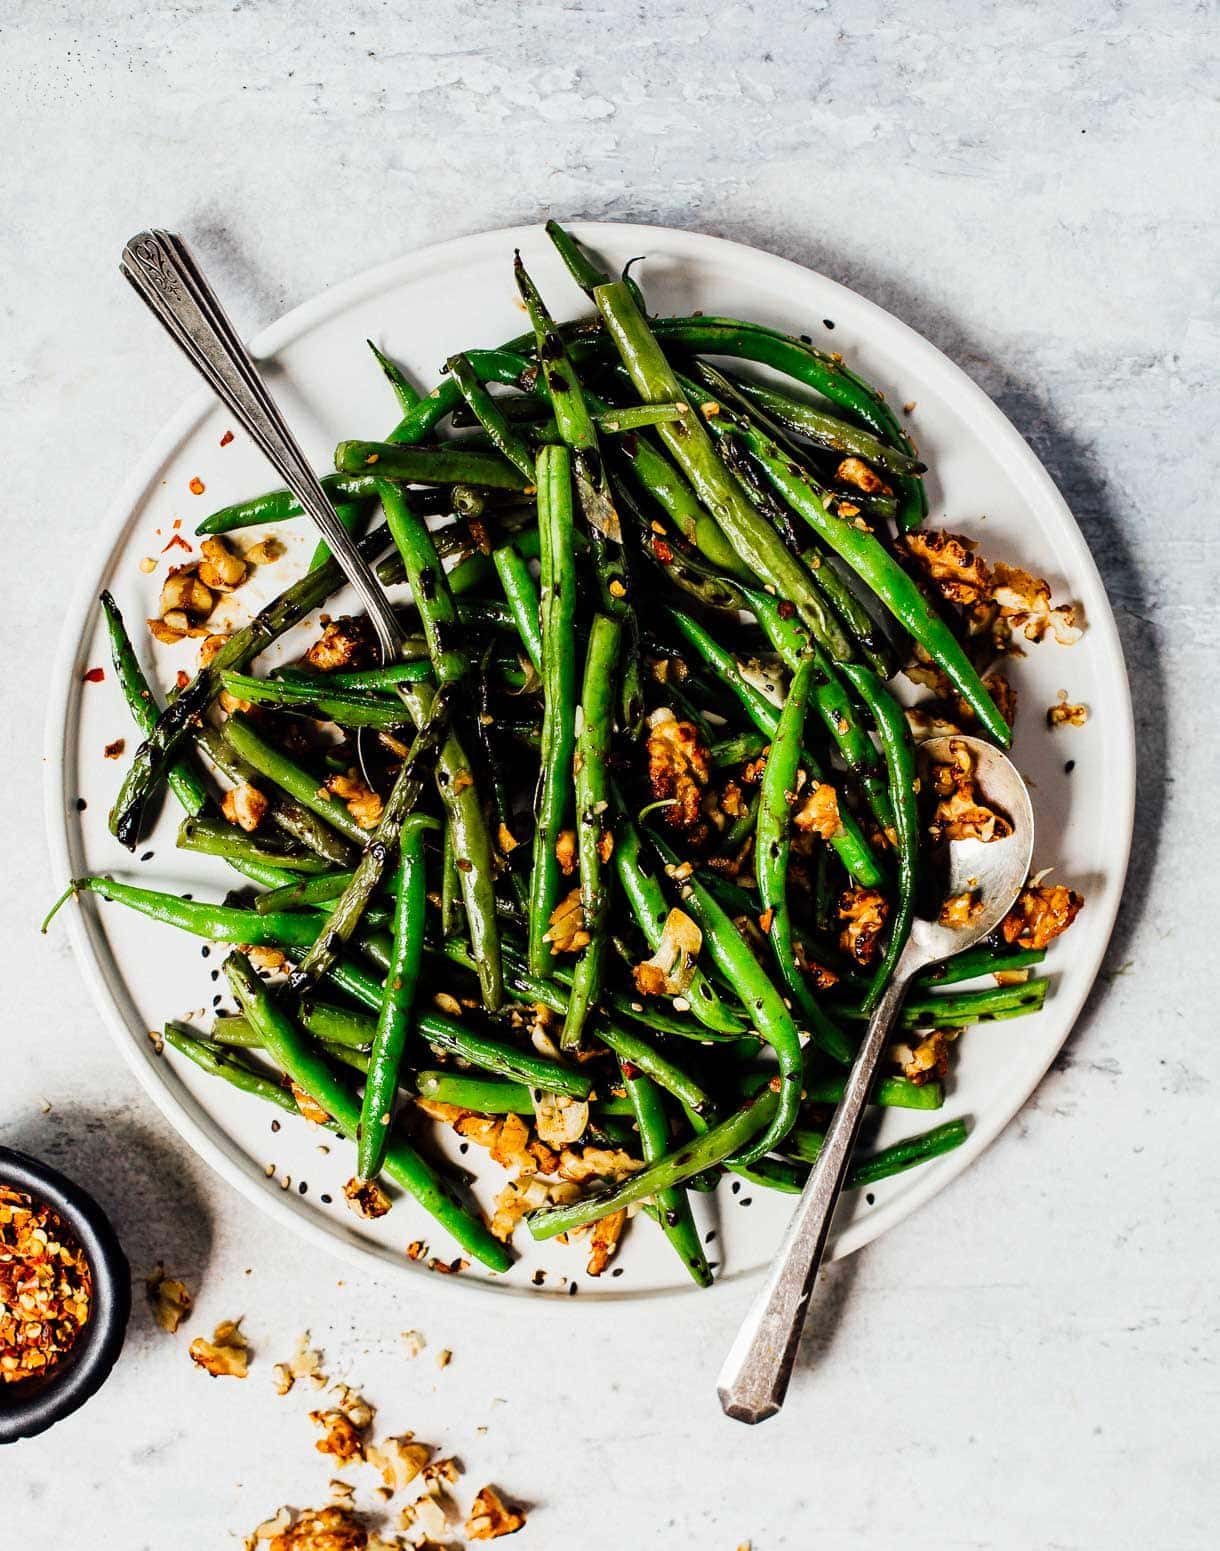 Spicy Green Beans with sesame walnuts